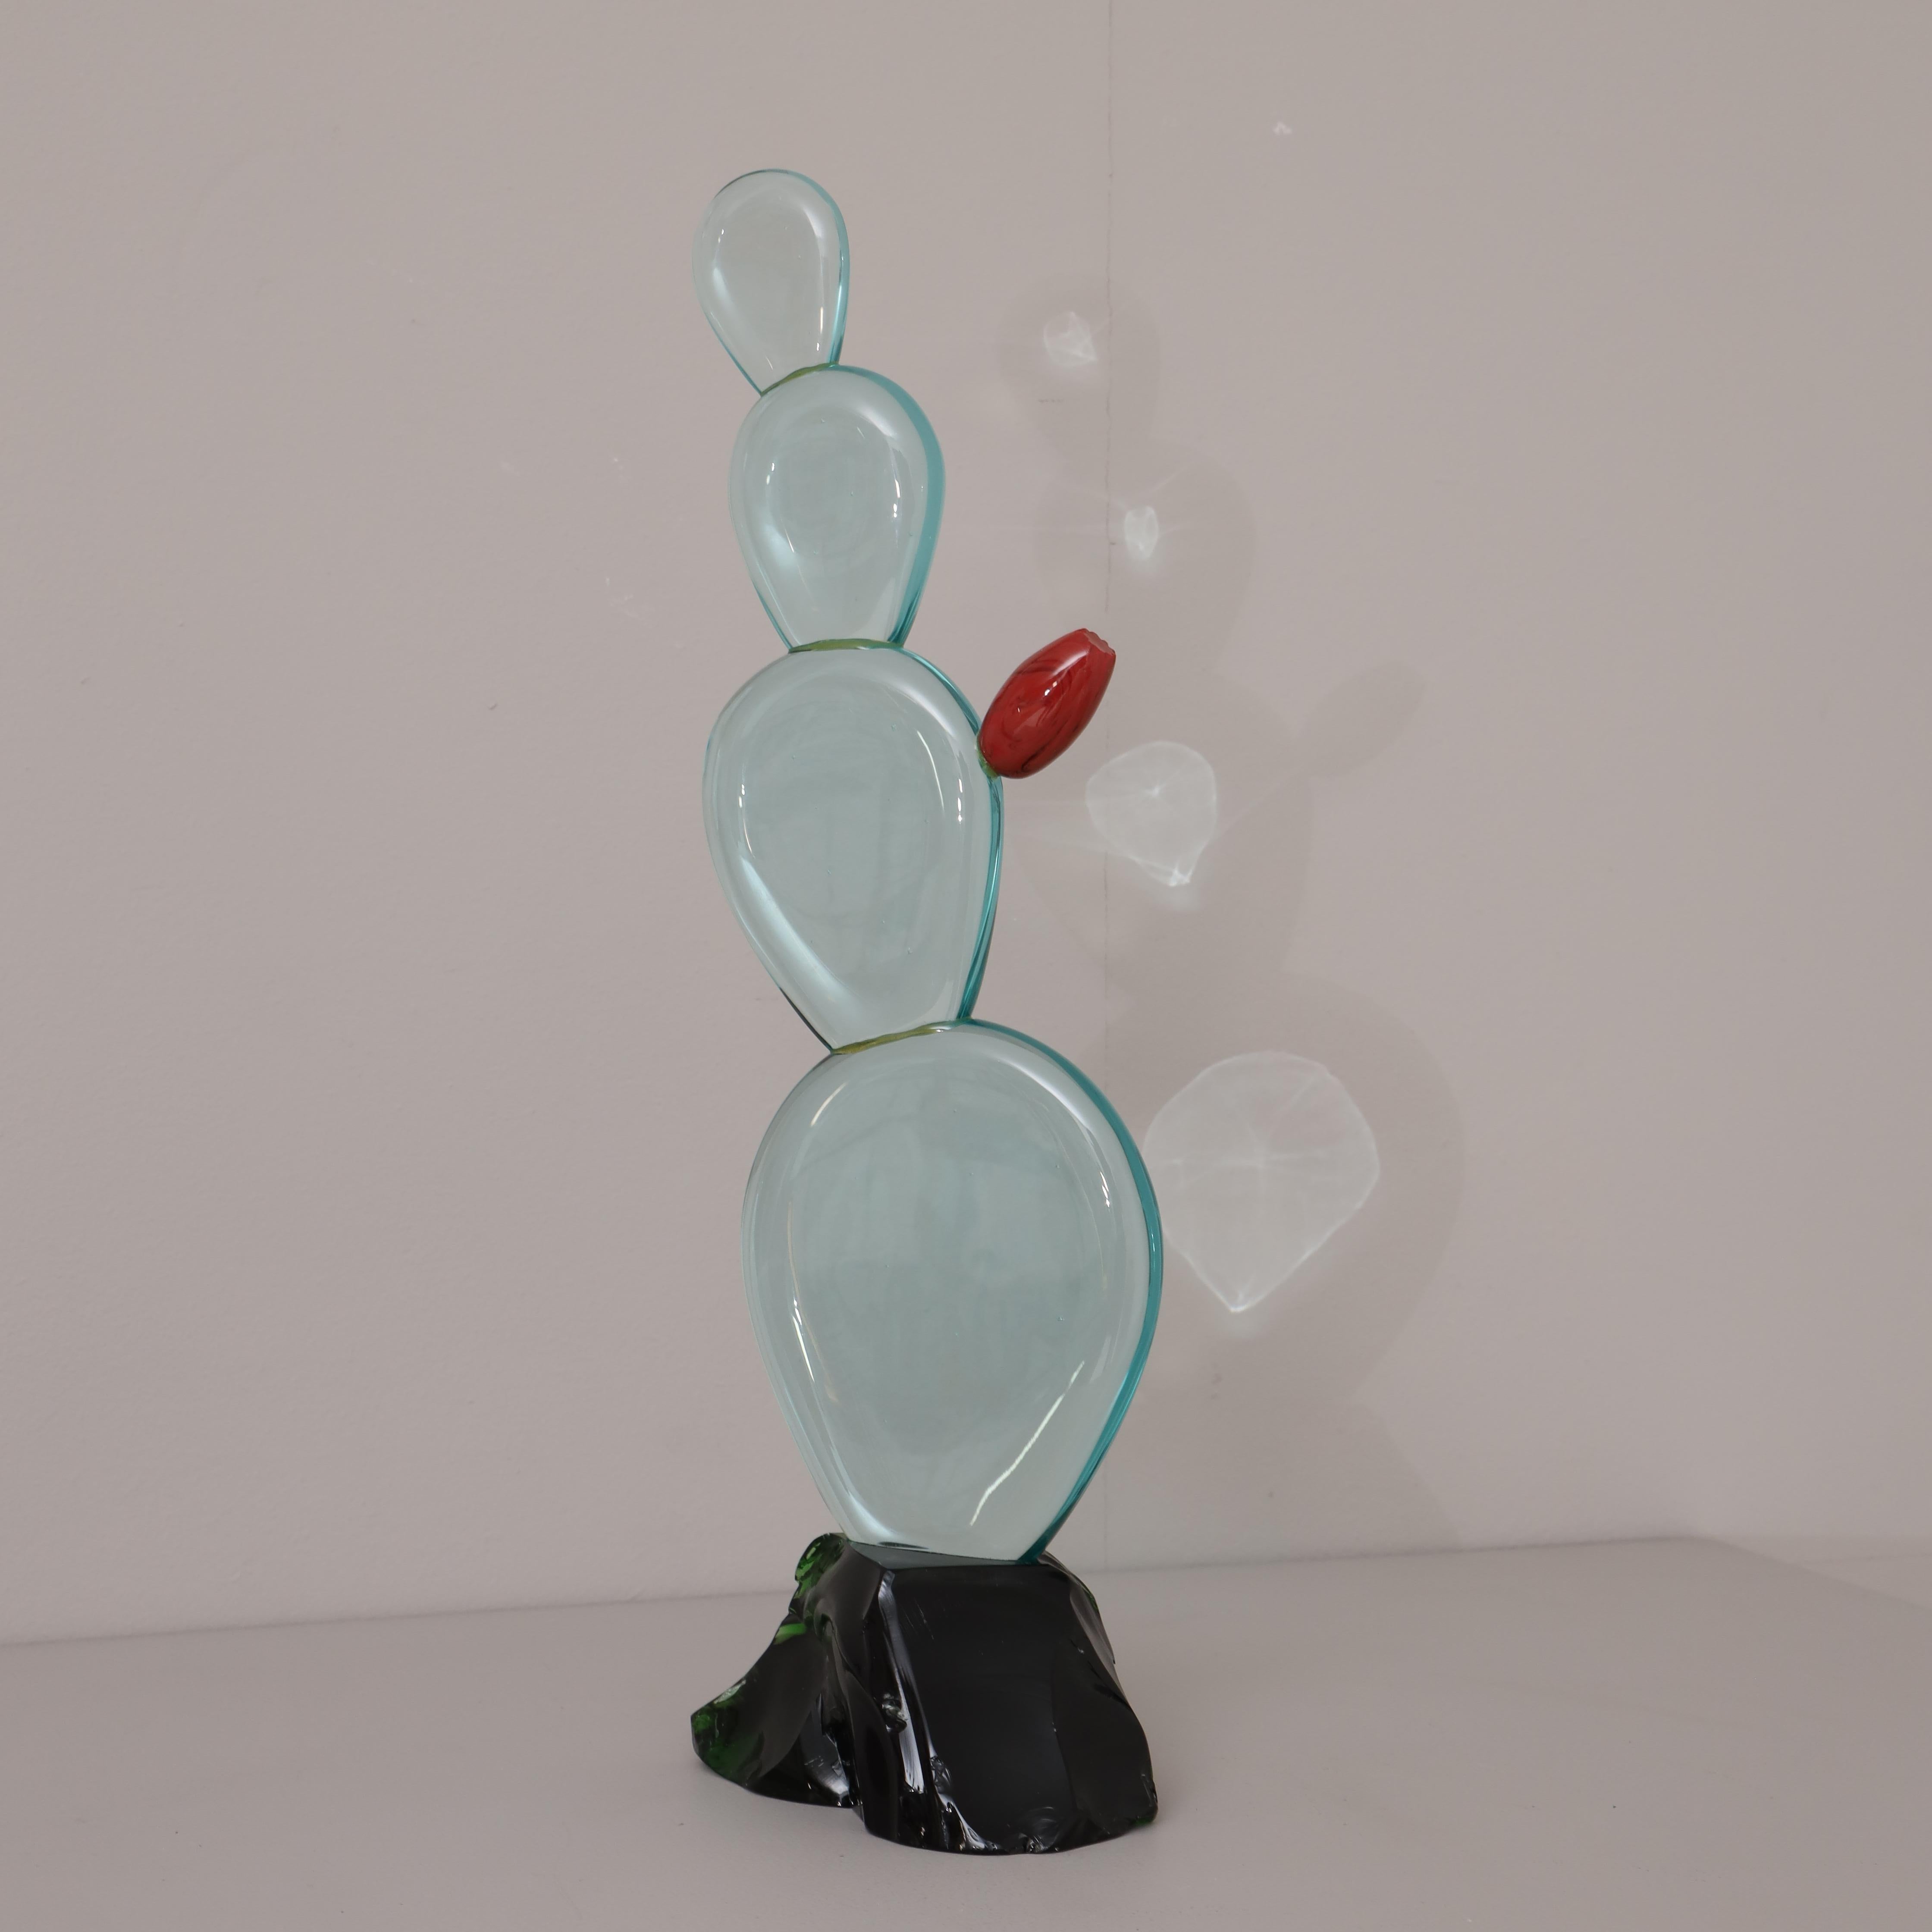 Decorative abstract Italian art glass sculpture.
Clear glass, red glass and emerald green glass base.